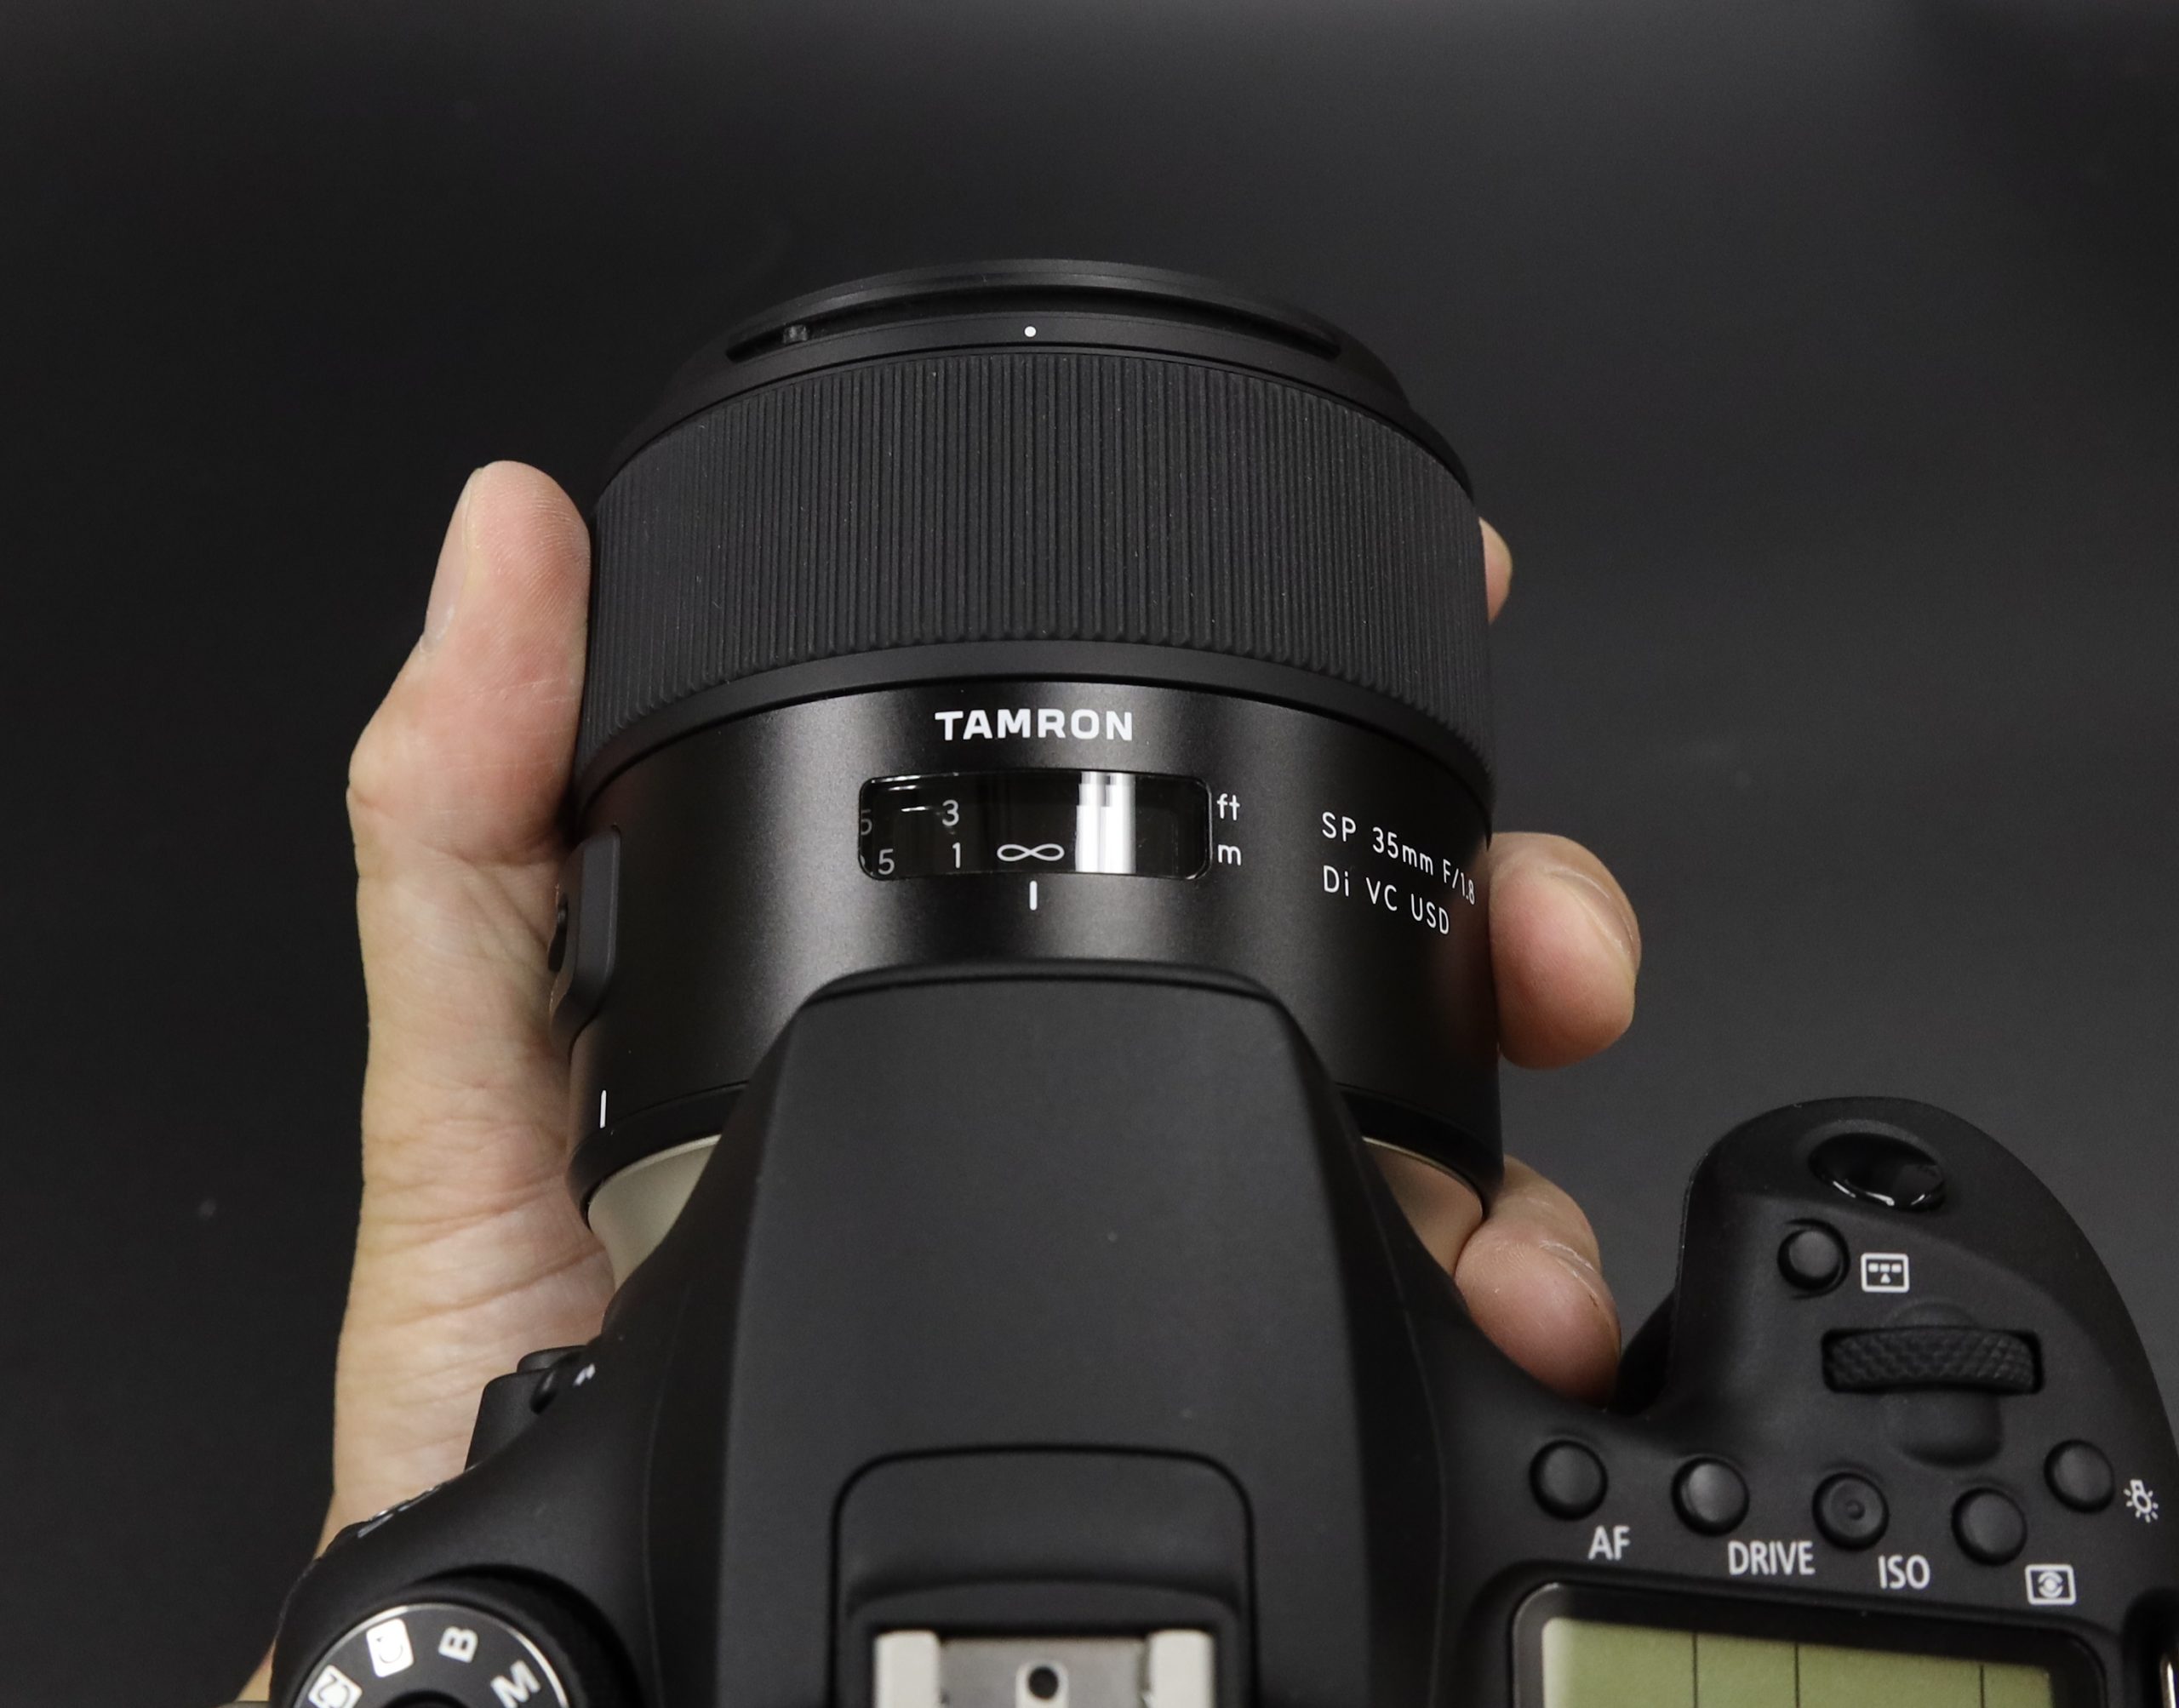 TAMRON】SP 35mm F1.8 Di VC USD/Model F012Eで撮る | THE MAP TIMES